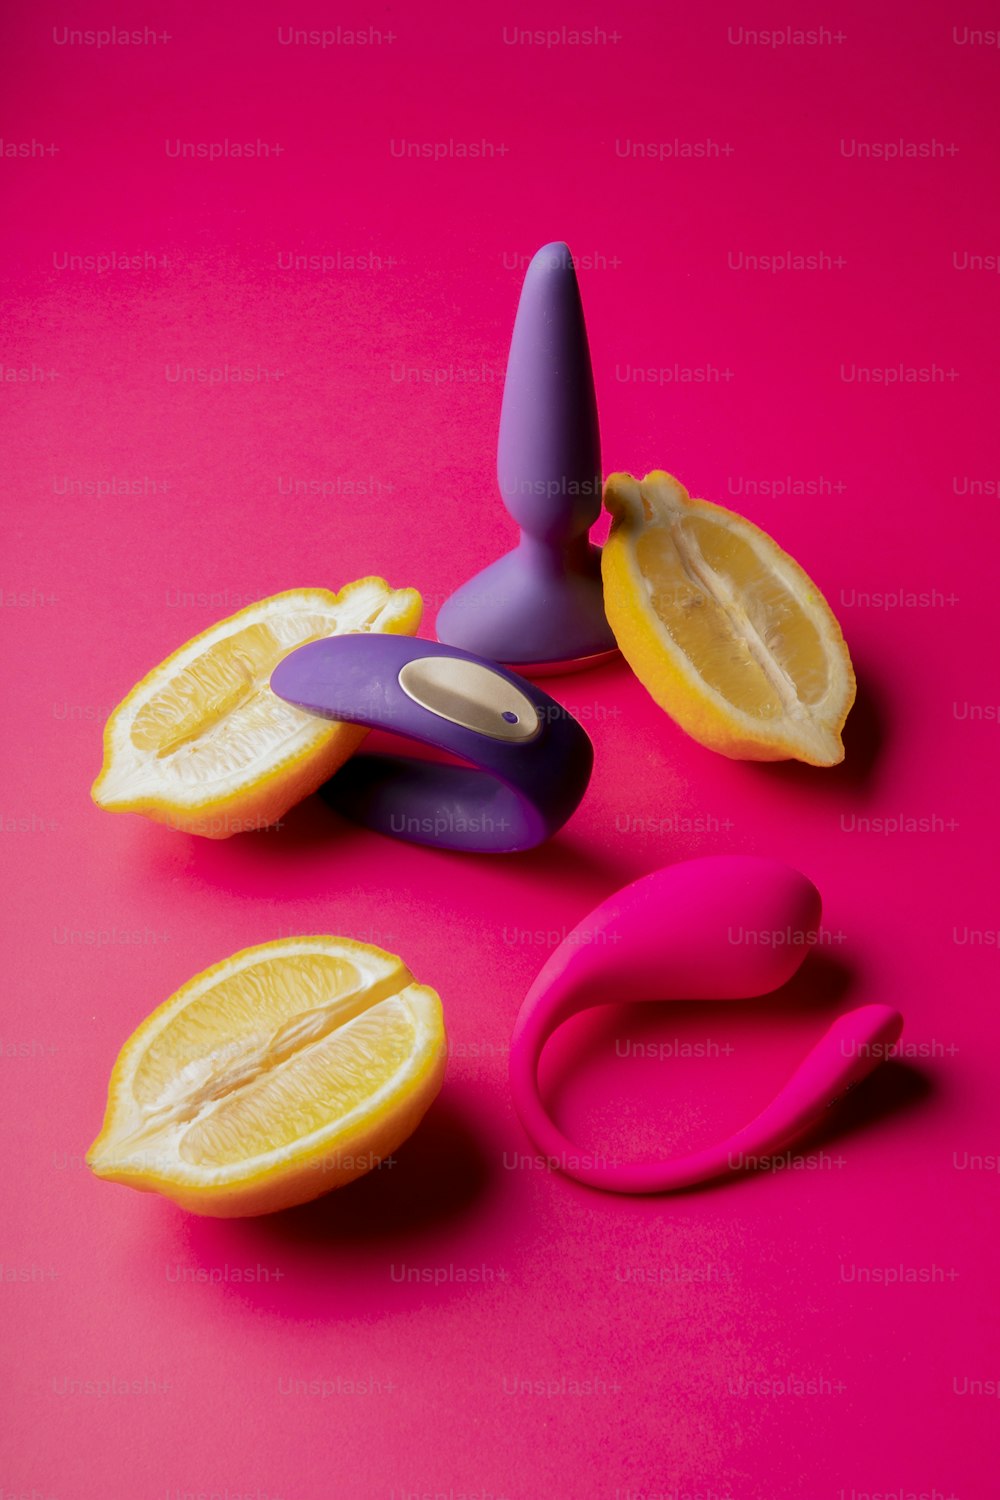 a pair of scissors and a sliced orange on a pink background